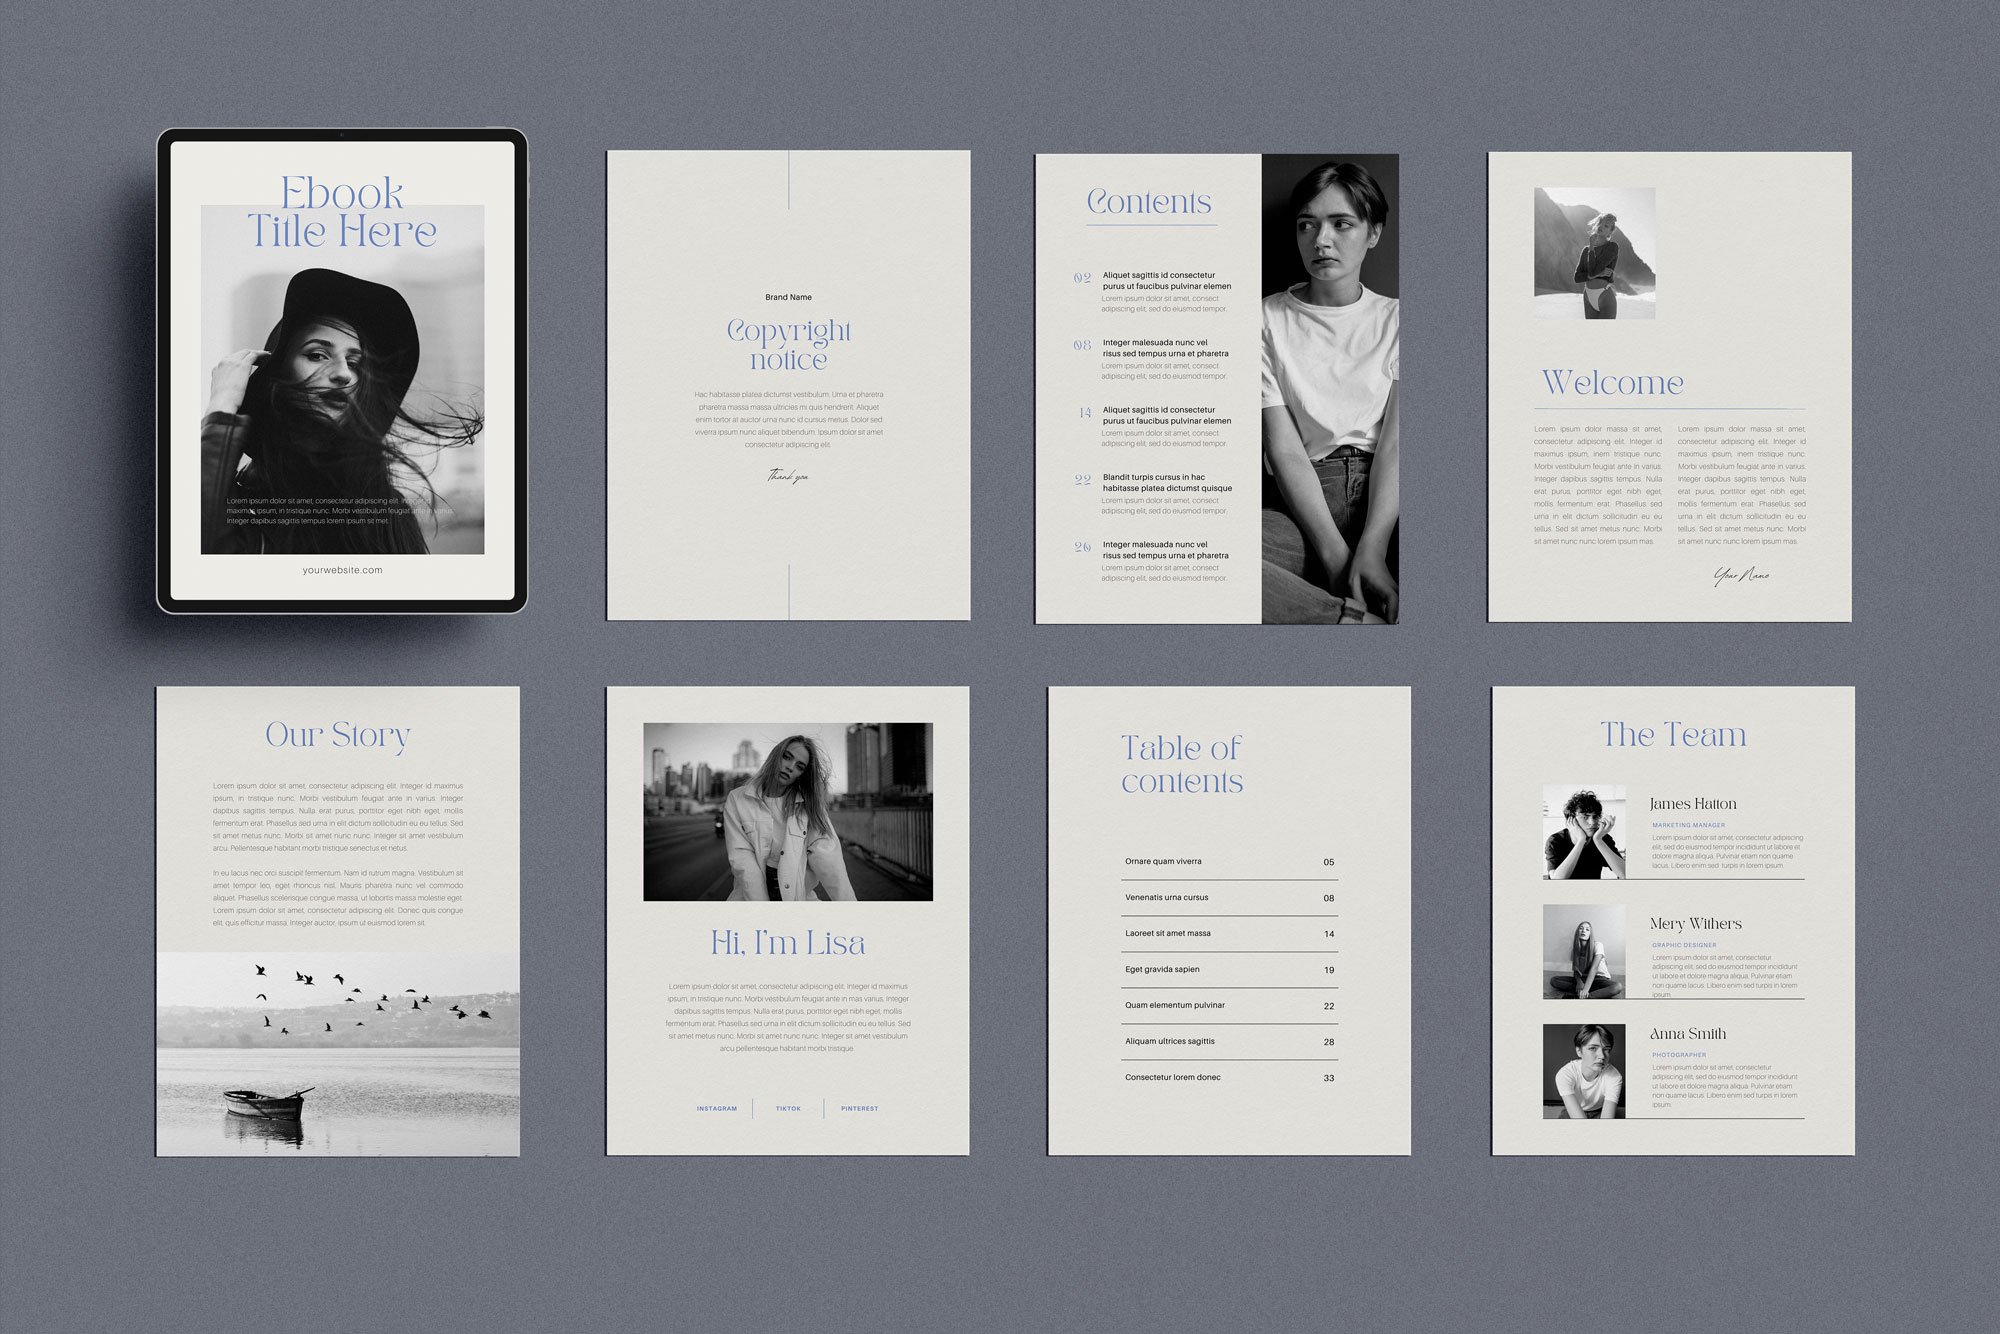 8. ebook flawless preview 22